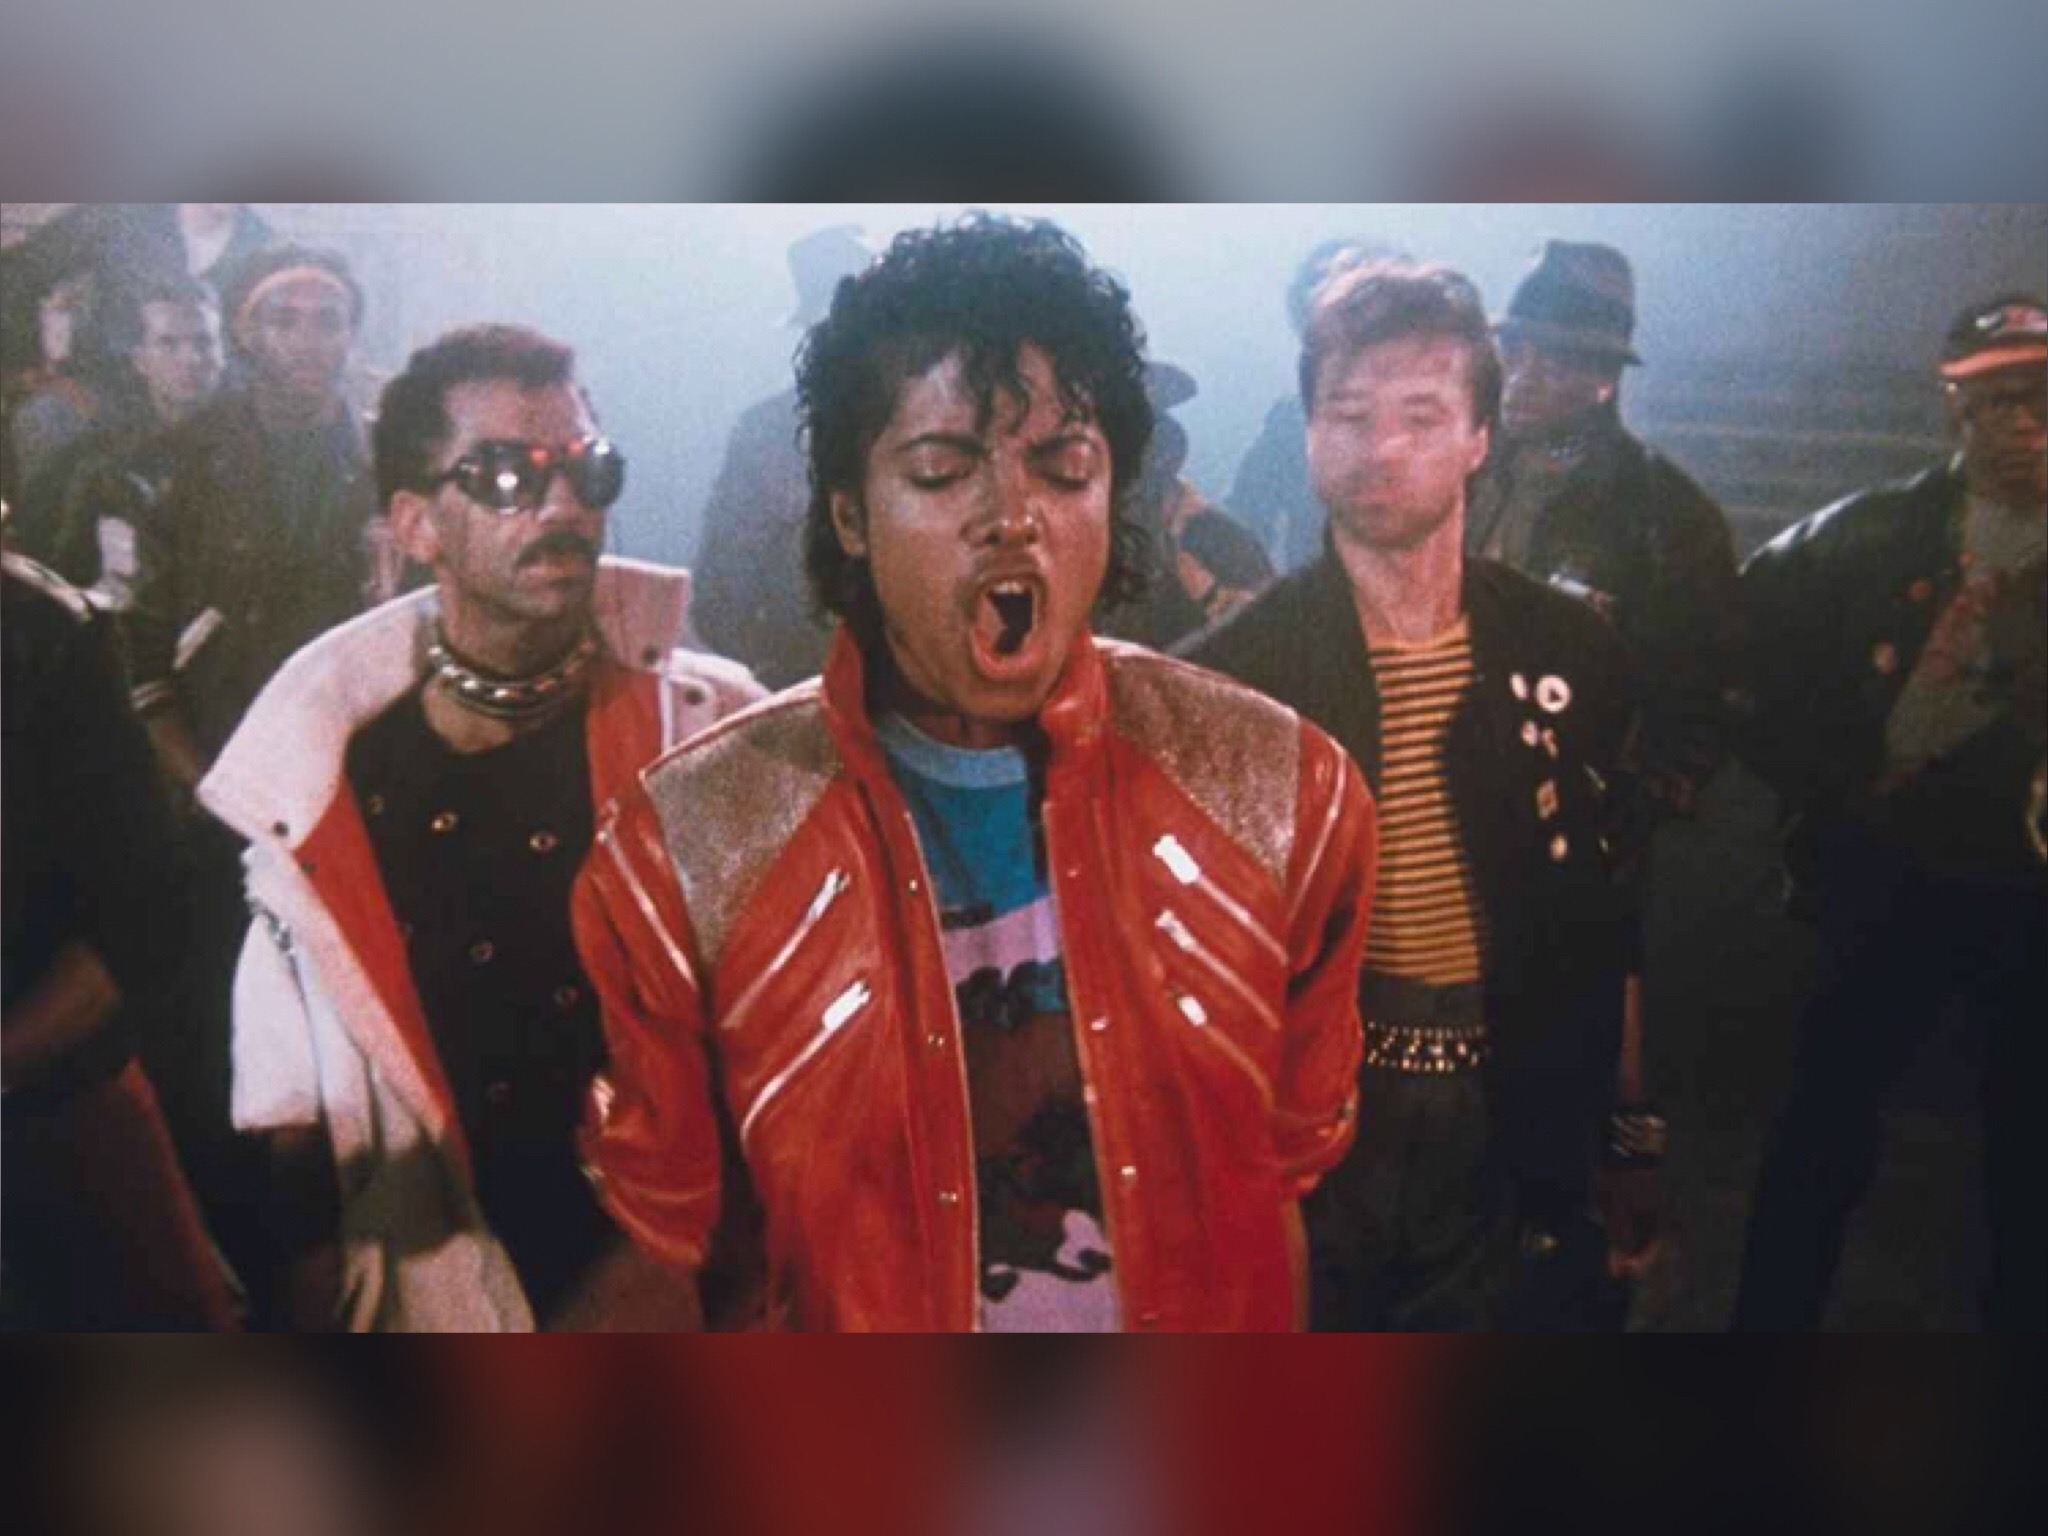 35 Years After Thriller, Michael Jackson's Iconic Sunglasses Get a